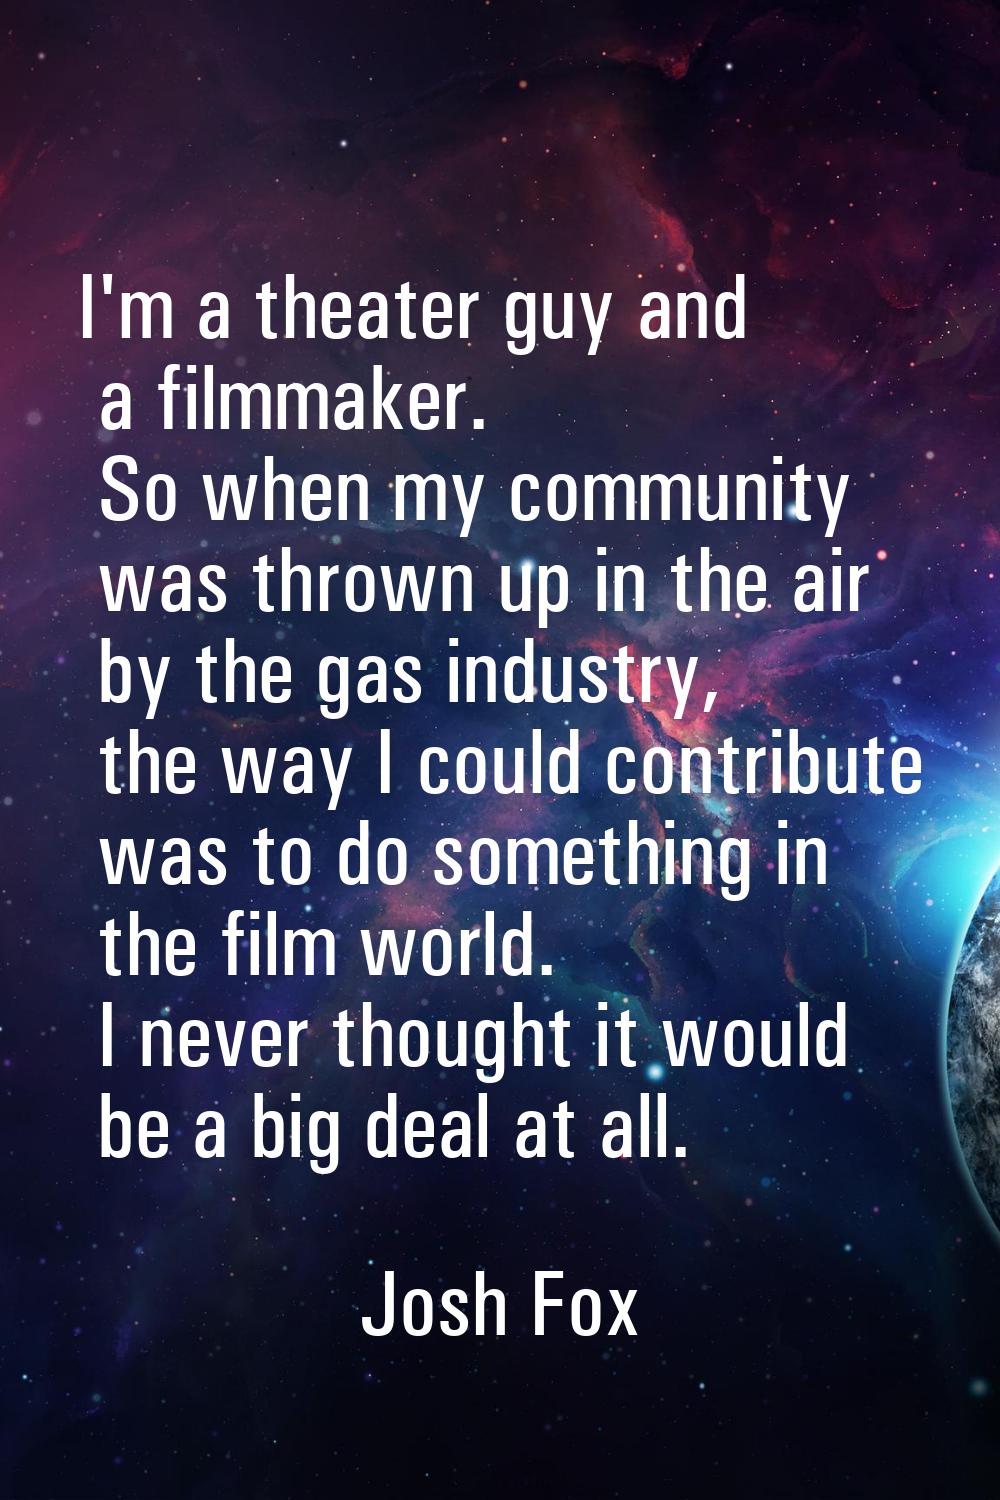 I'm a theater guy and a filmmaker. So when my community was thrown up in the air by the gas industr